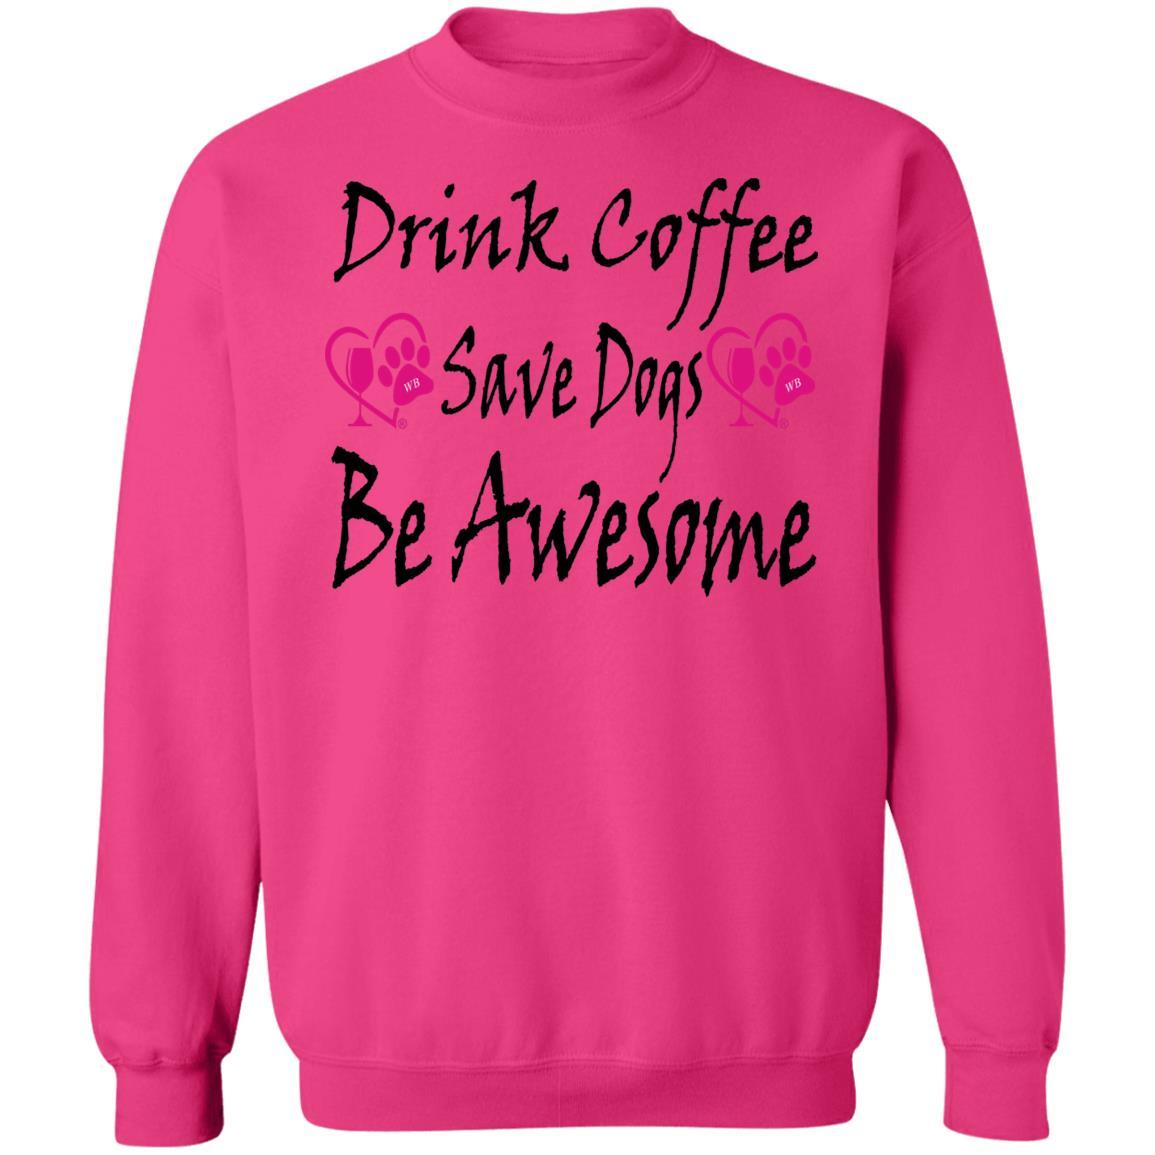 Sweatshirts Heliconia / S Winey Bitches Co "Drink Coffee Save Dogs Be Awesome" Crewneck Pullover Sweatshirt  8 oz. WineyBitchesCo